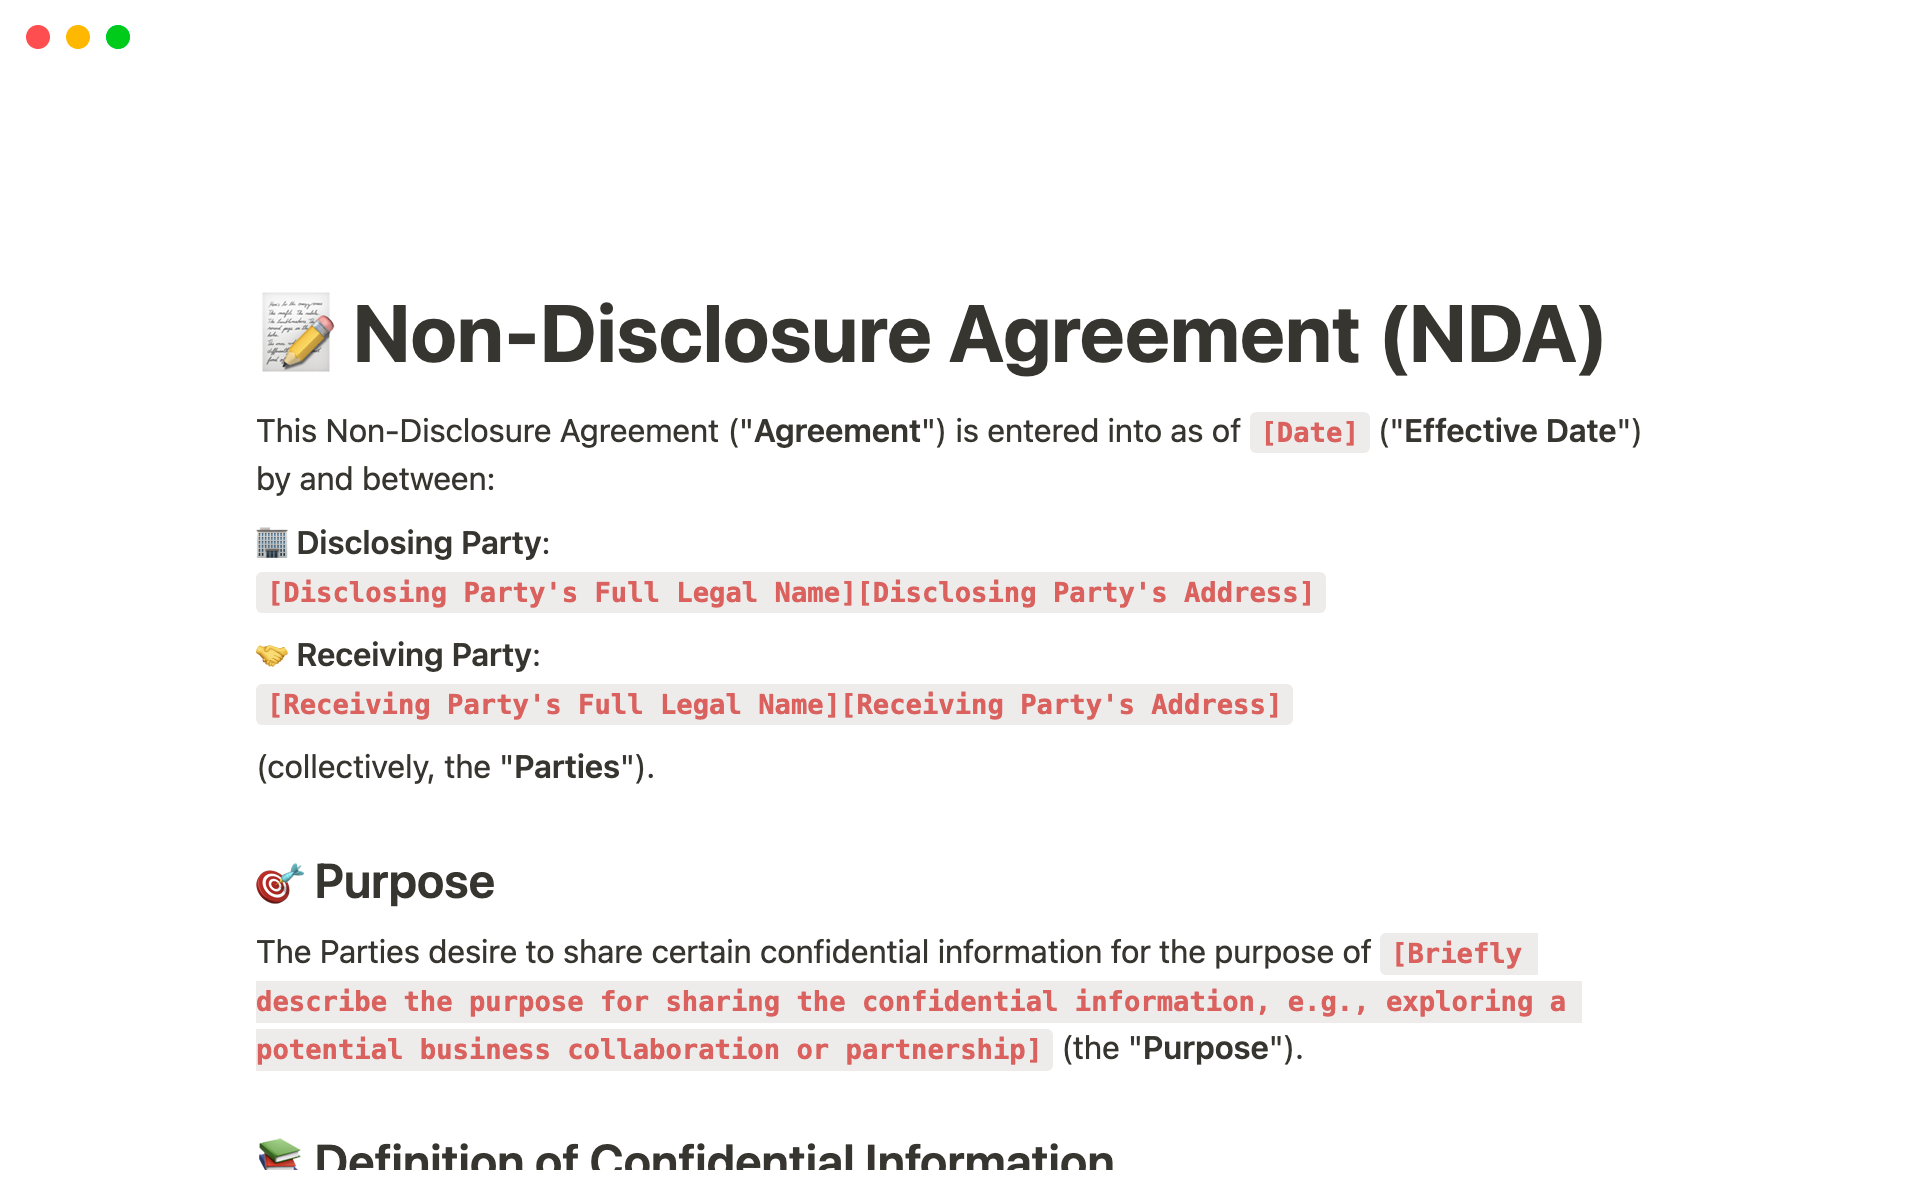 A basic NDA template to protect confidential information shared between parties during business discussions or collaborations.